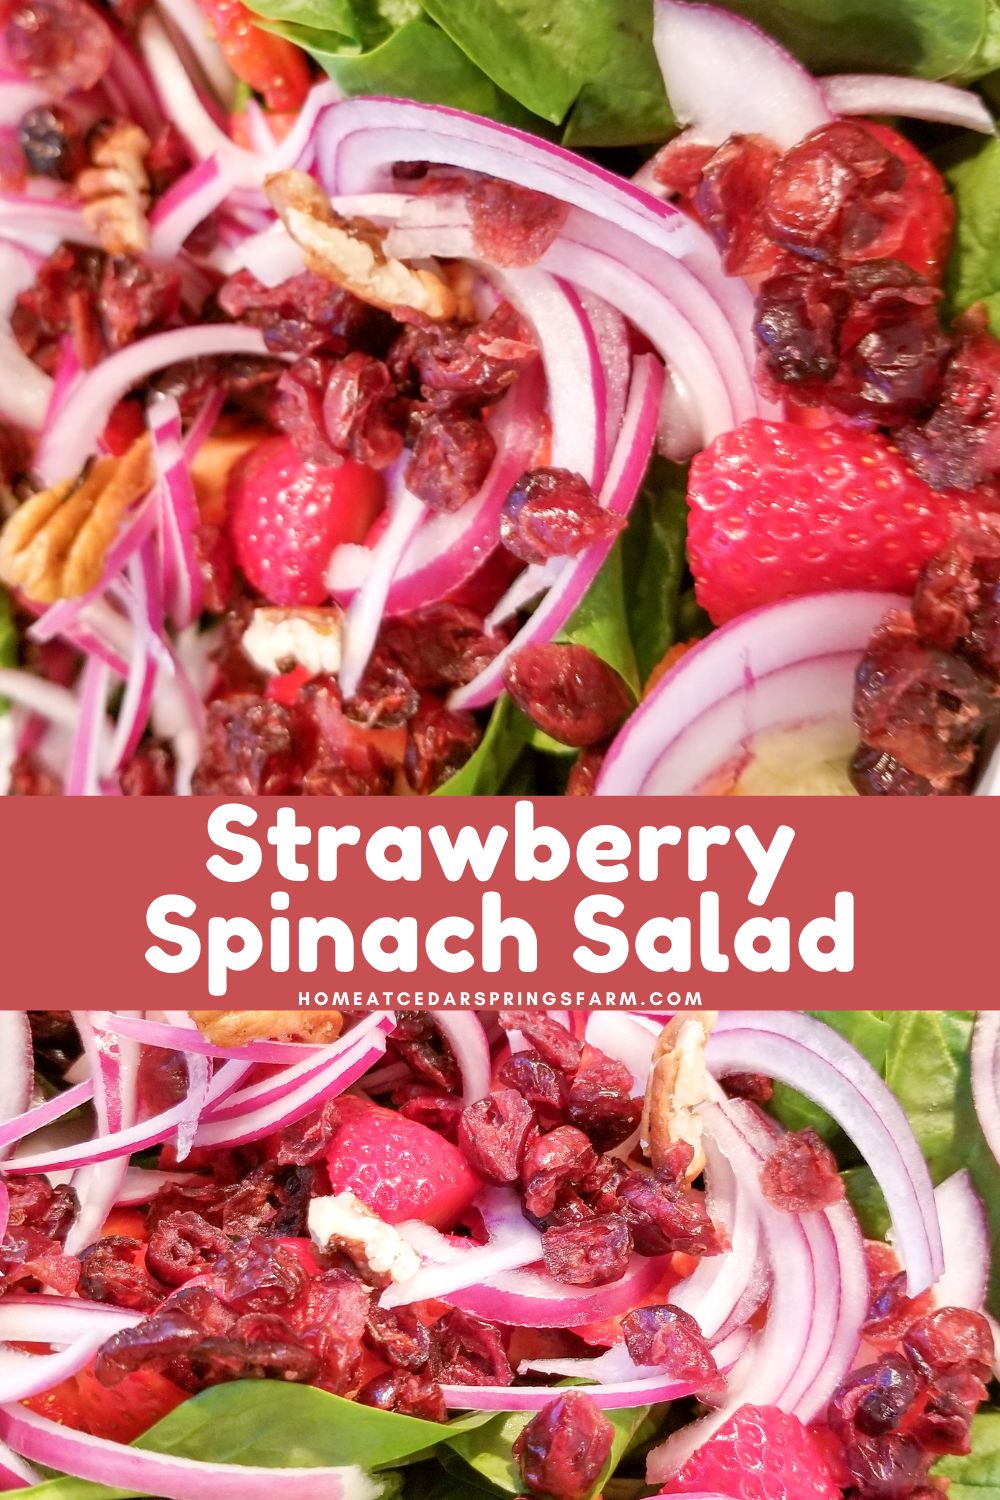 Strawberry Spinach Salad with text overlay